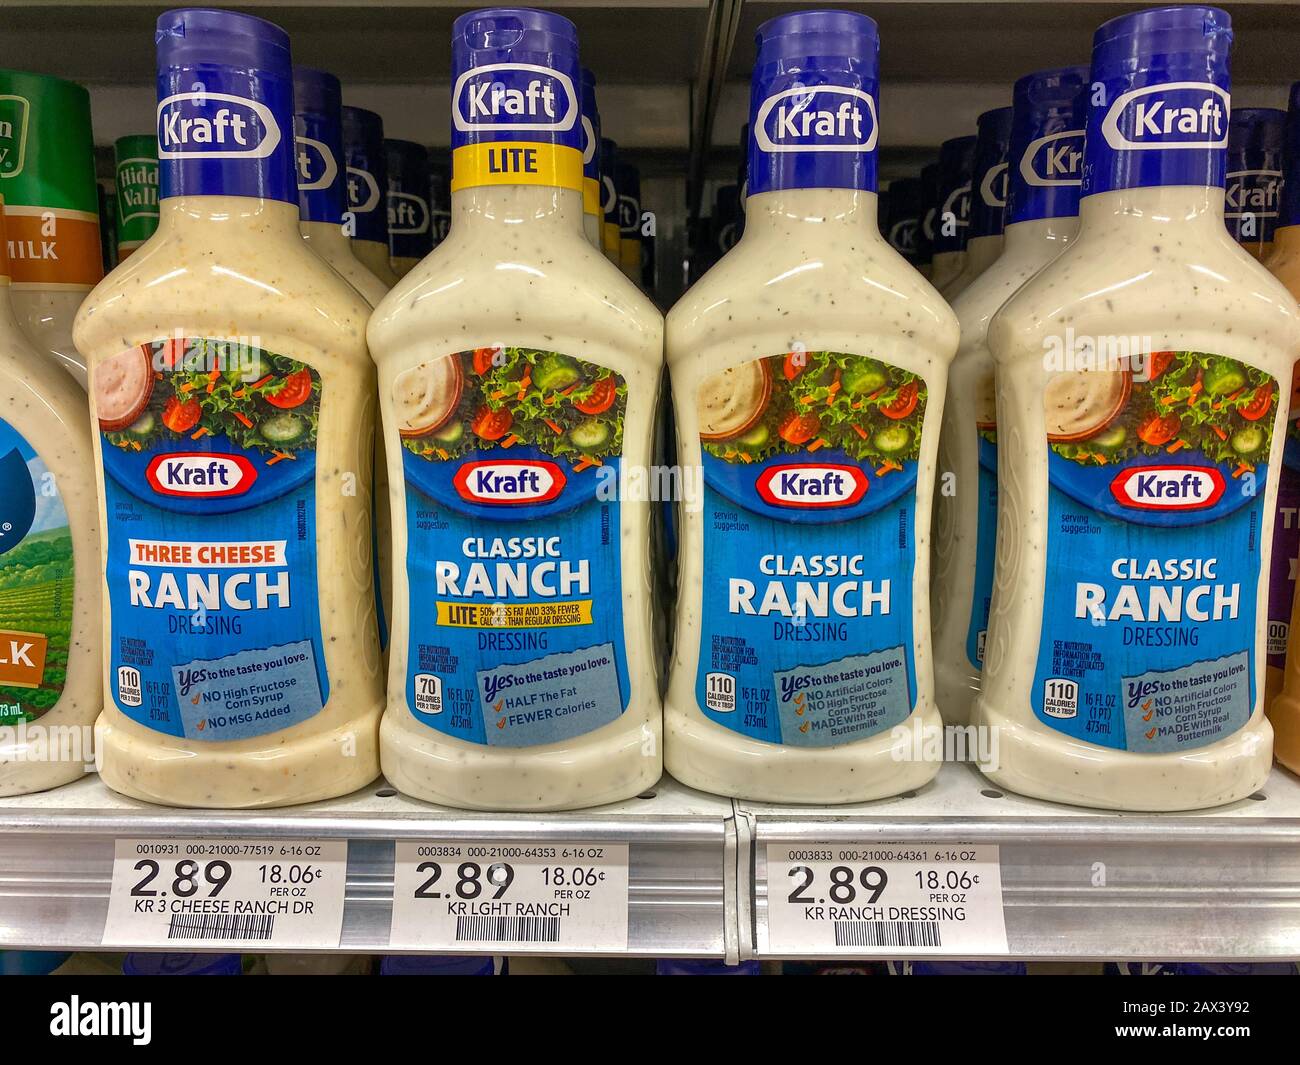 https://c8.alamy.com/comp/2AX3Y92/orlandoflusa-2820the-kraft-classic-ranch-salad-dressing-display-of-a-publix-grocery-store-kraft-salad-dressing-is-sold-and-manufactured-by-kra-2AX3Y92.jpg